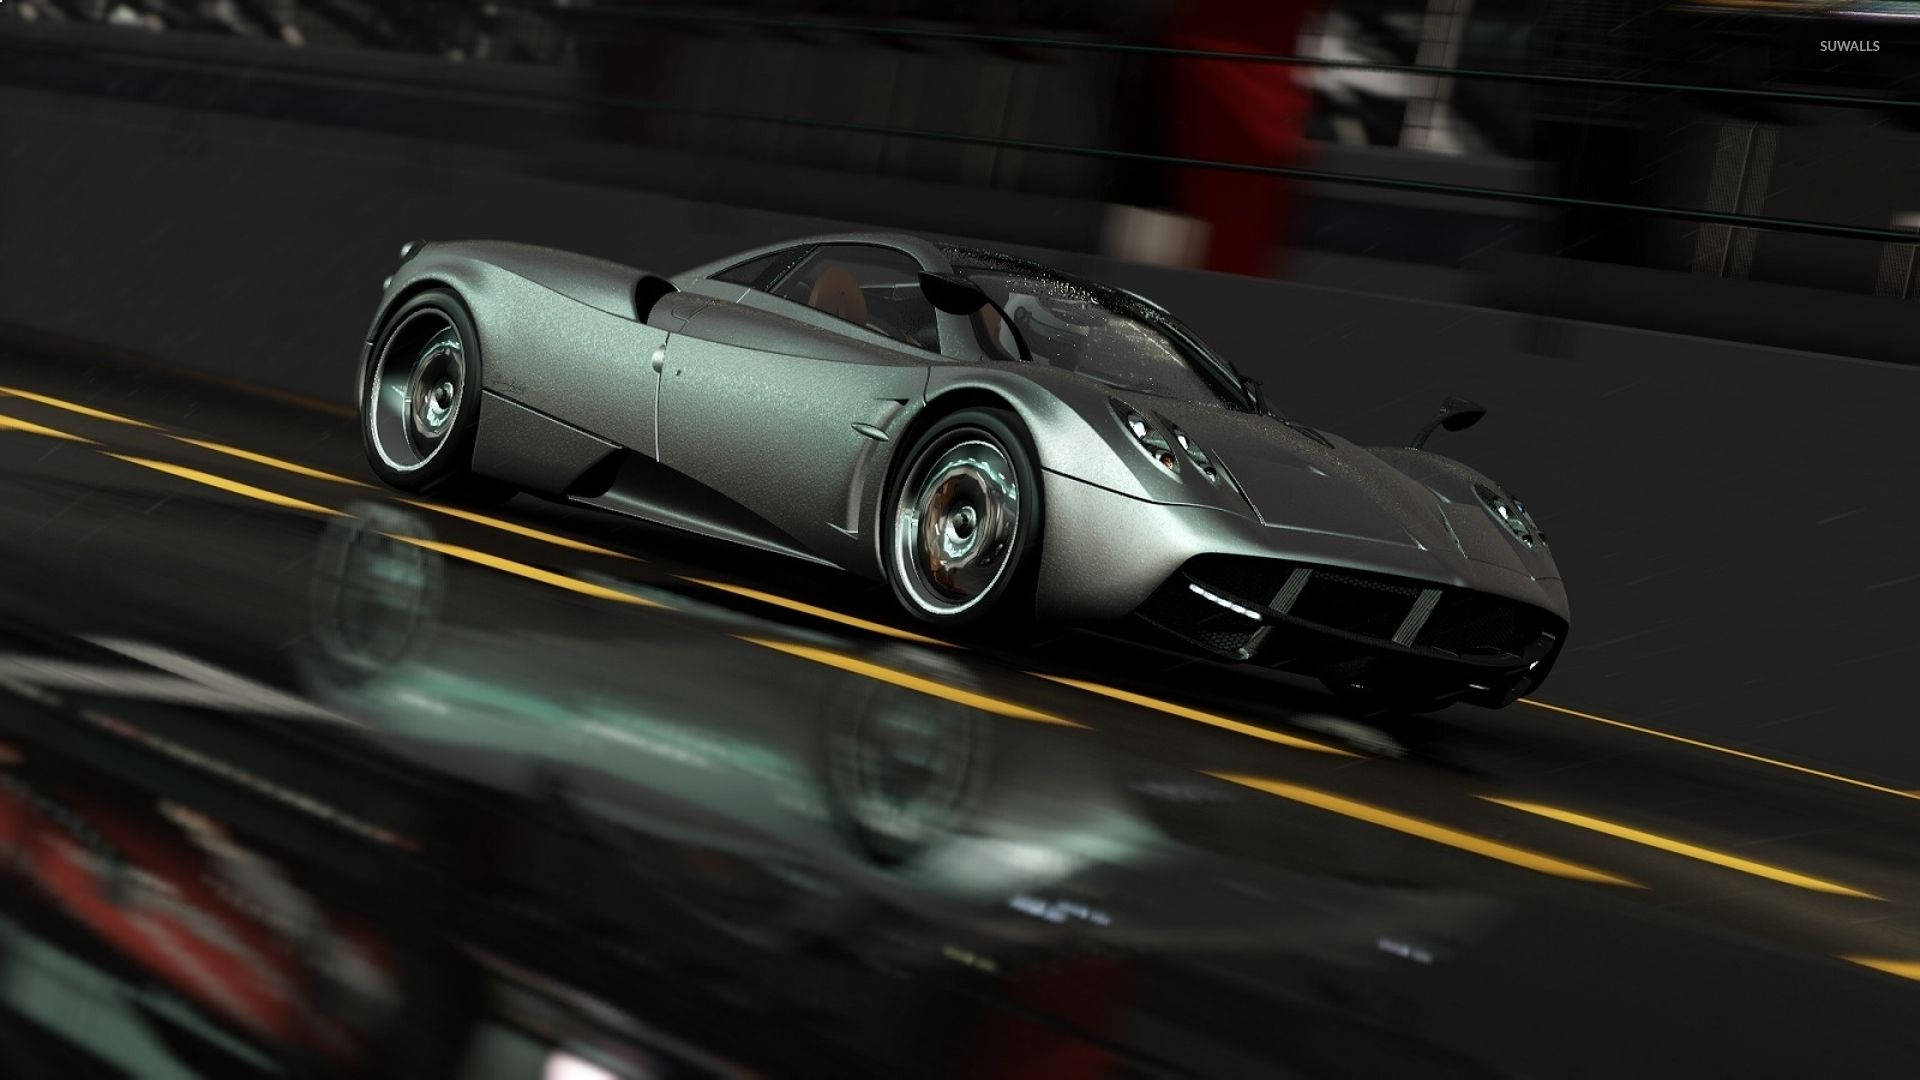 The Thrill Of Speed In Project Cars 2 With Pagani Huayra.